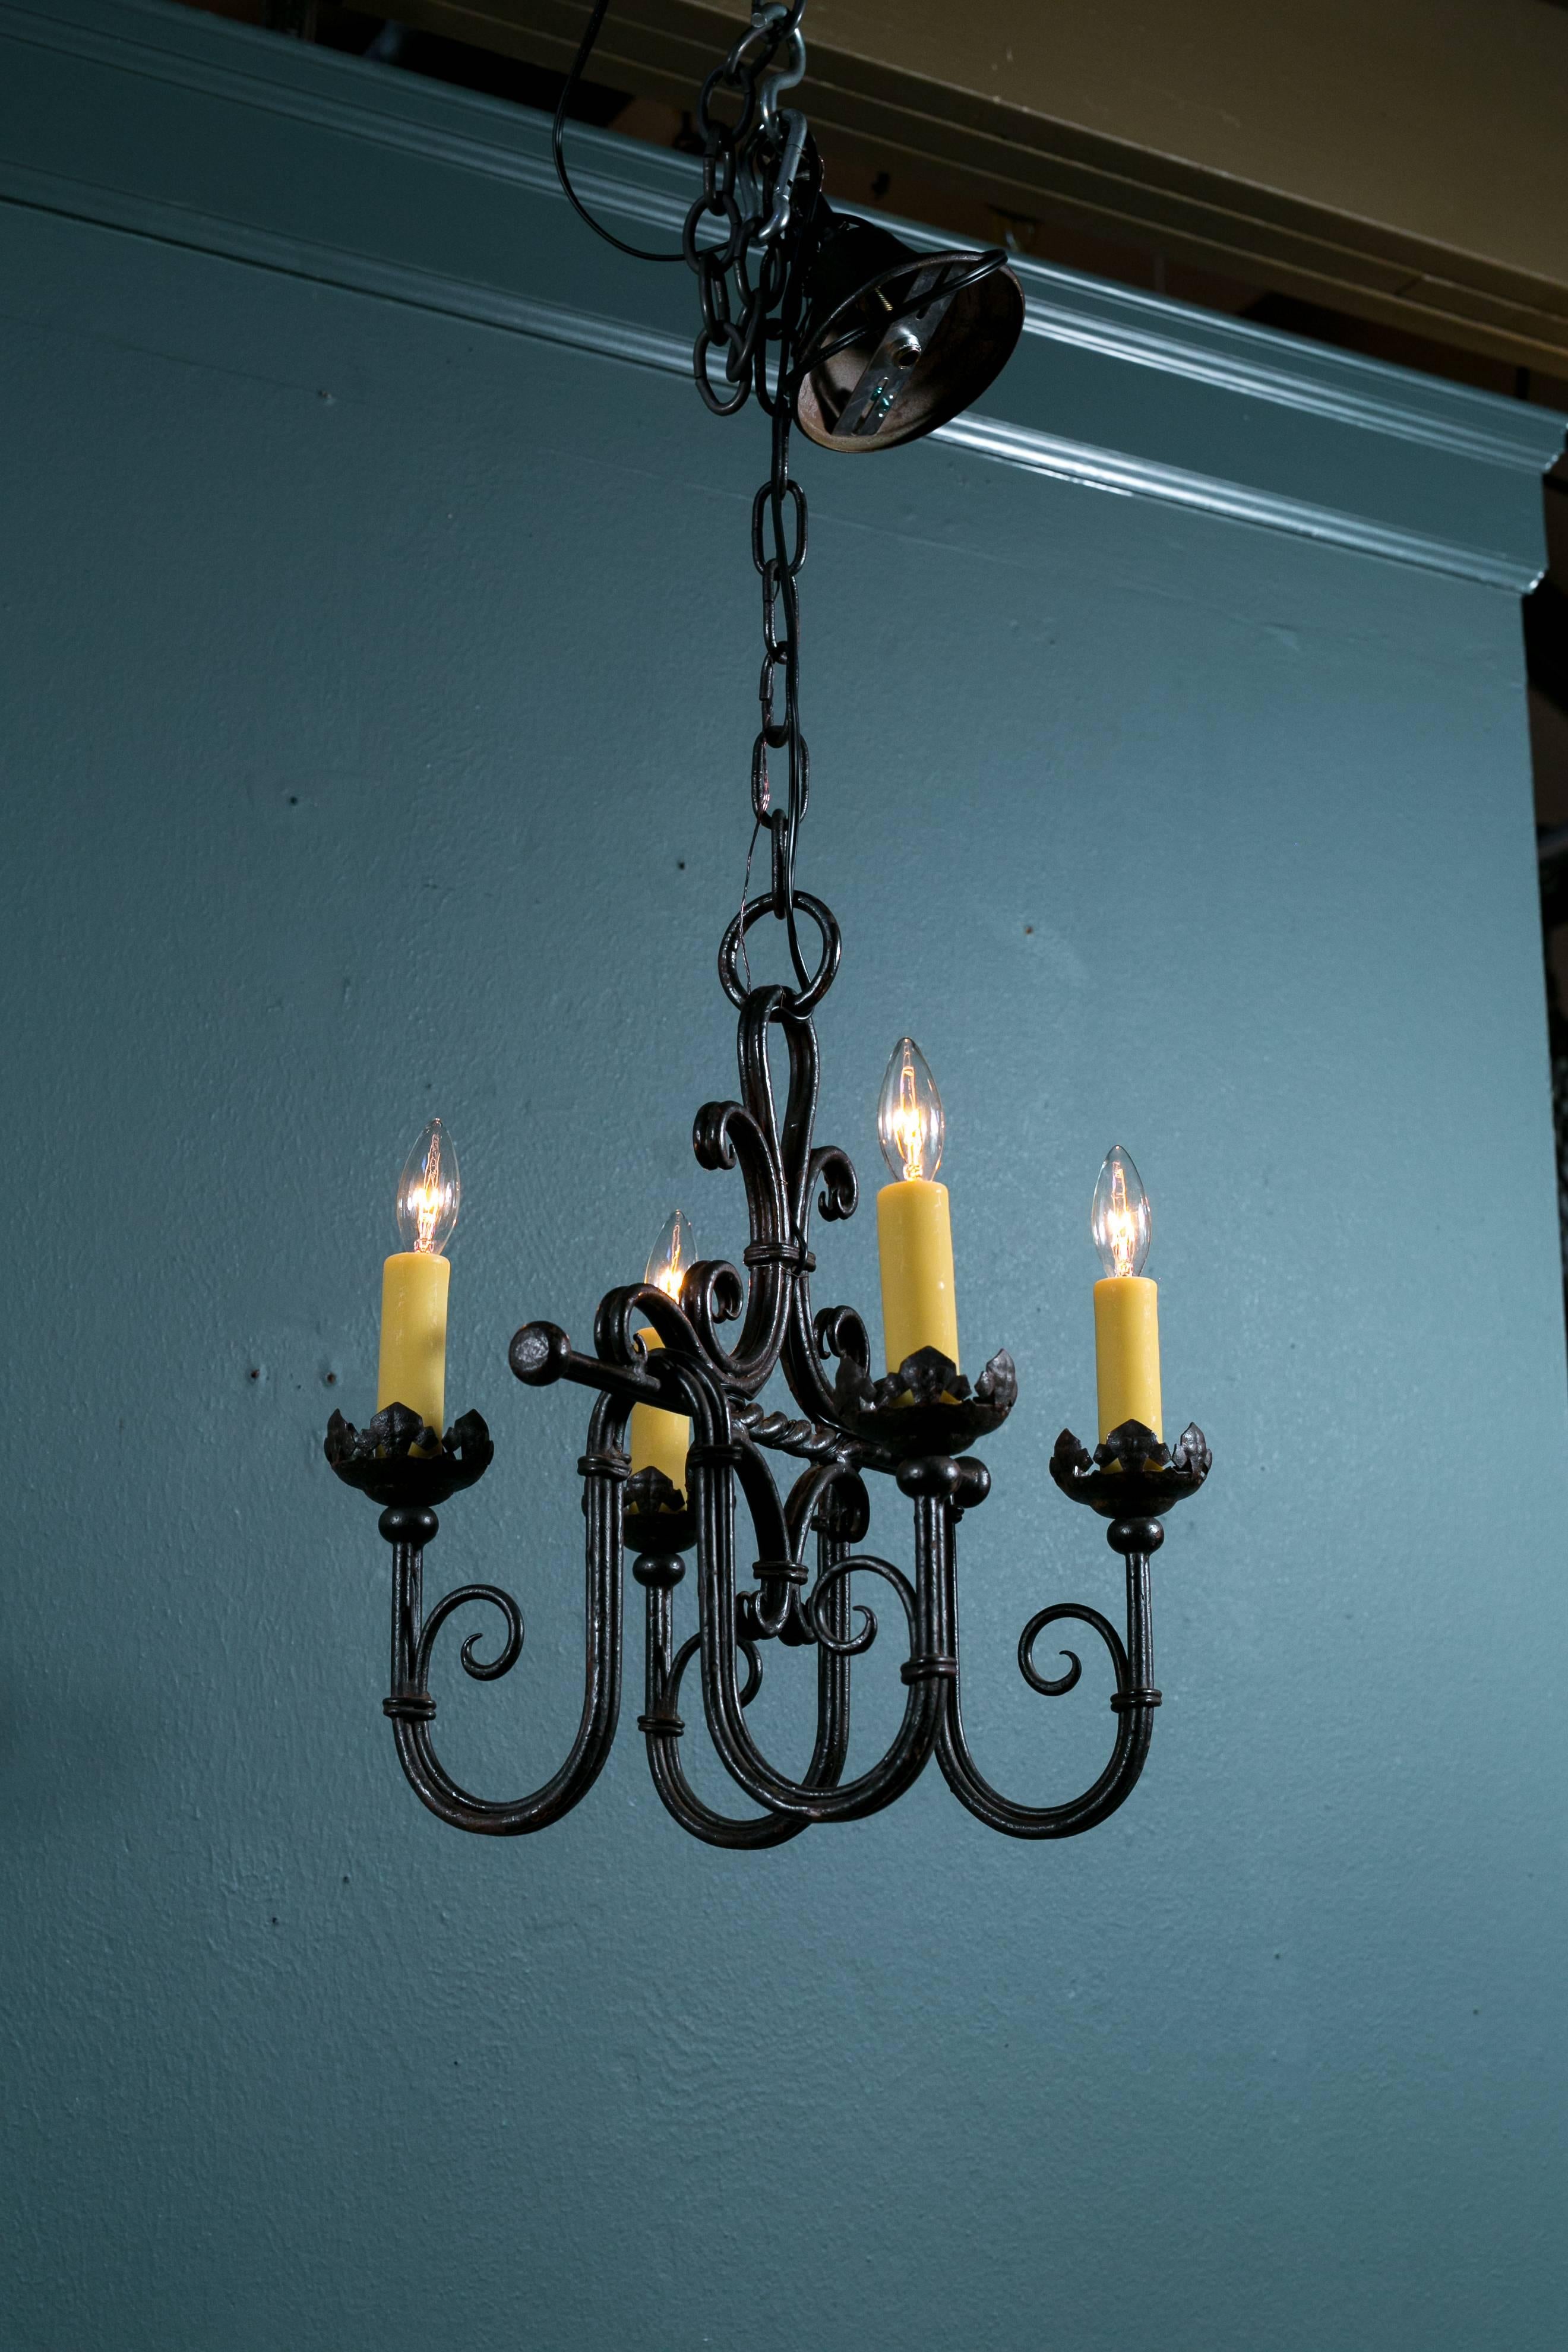 Petite European wrought iron chandelier. Would be perfect for a small kitchen island, butler's pantry or bar. Newly rewired for use in the USA with all UL approved parts and four candelabra sockets. Comes with matching chain and canopy.